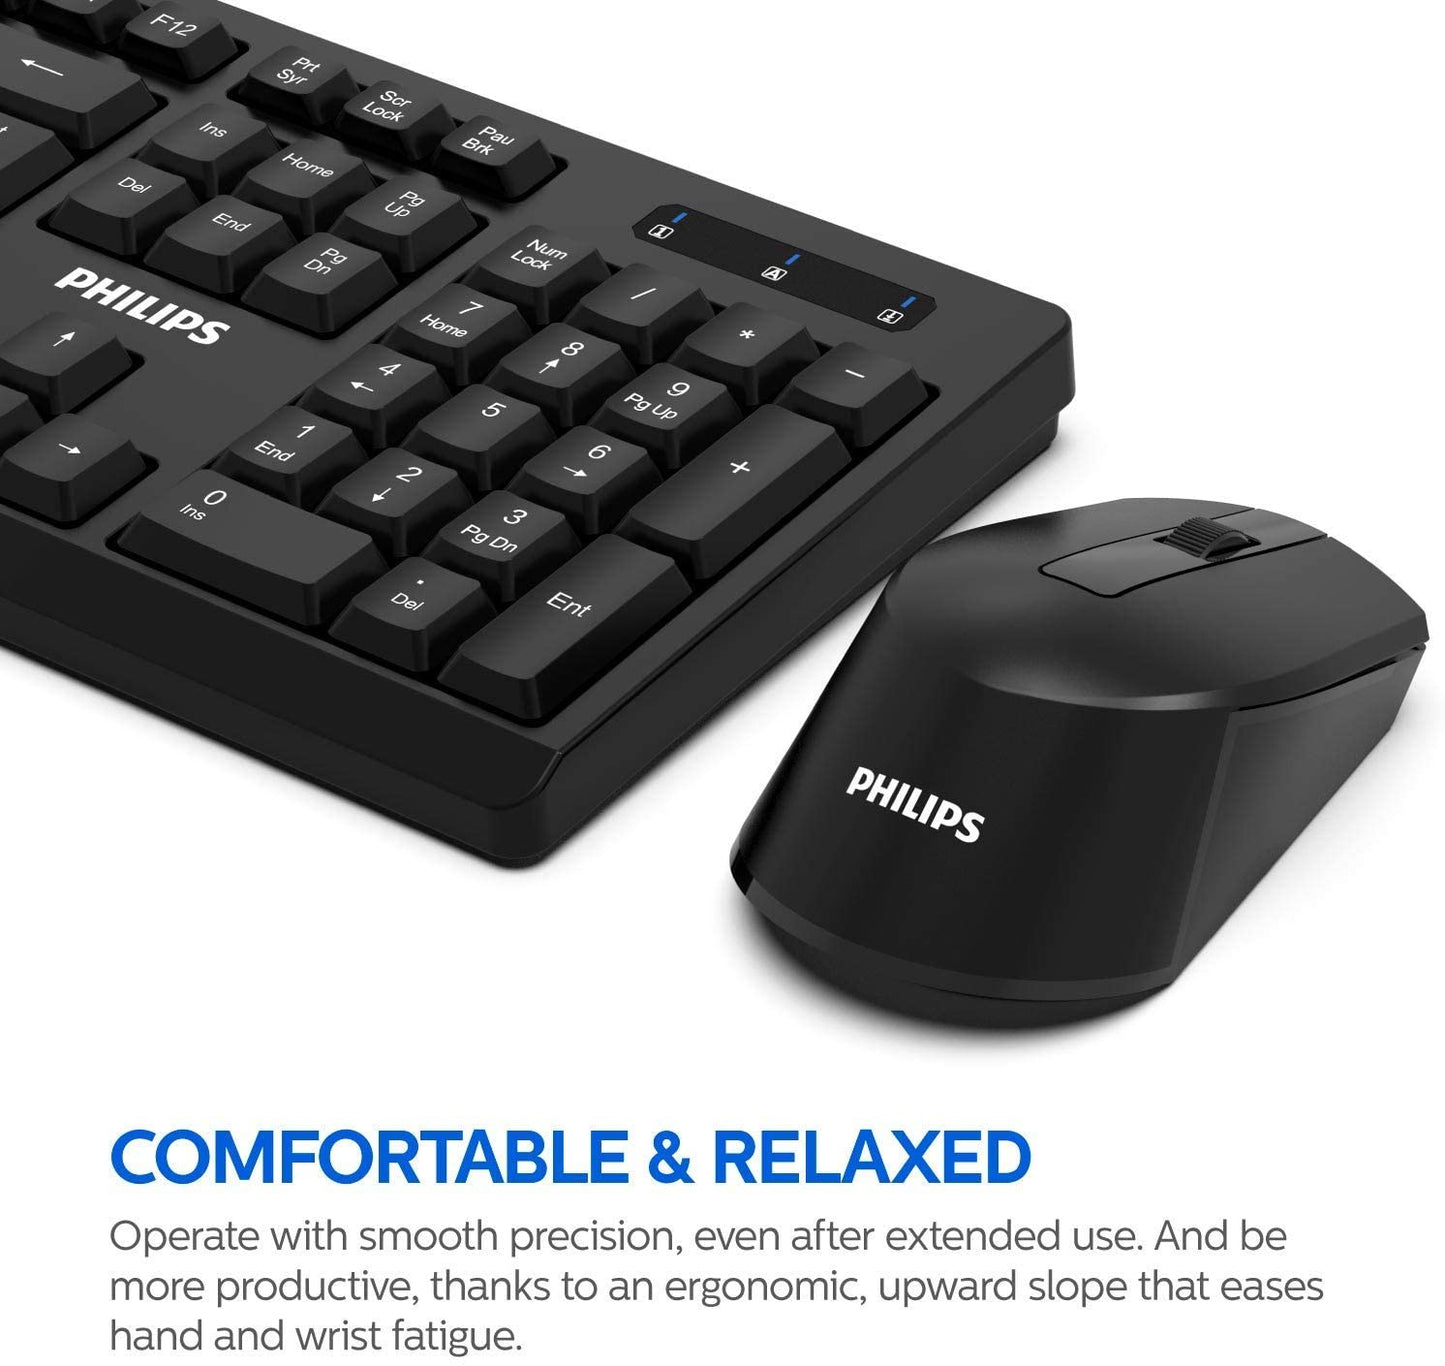 Philips Wireless Combo Keyboard and Mouse